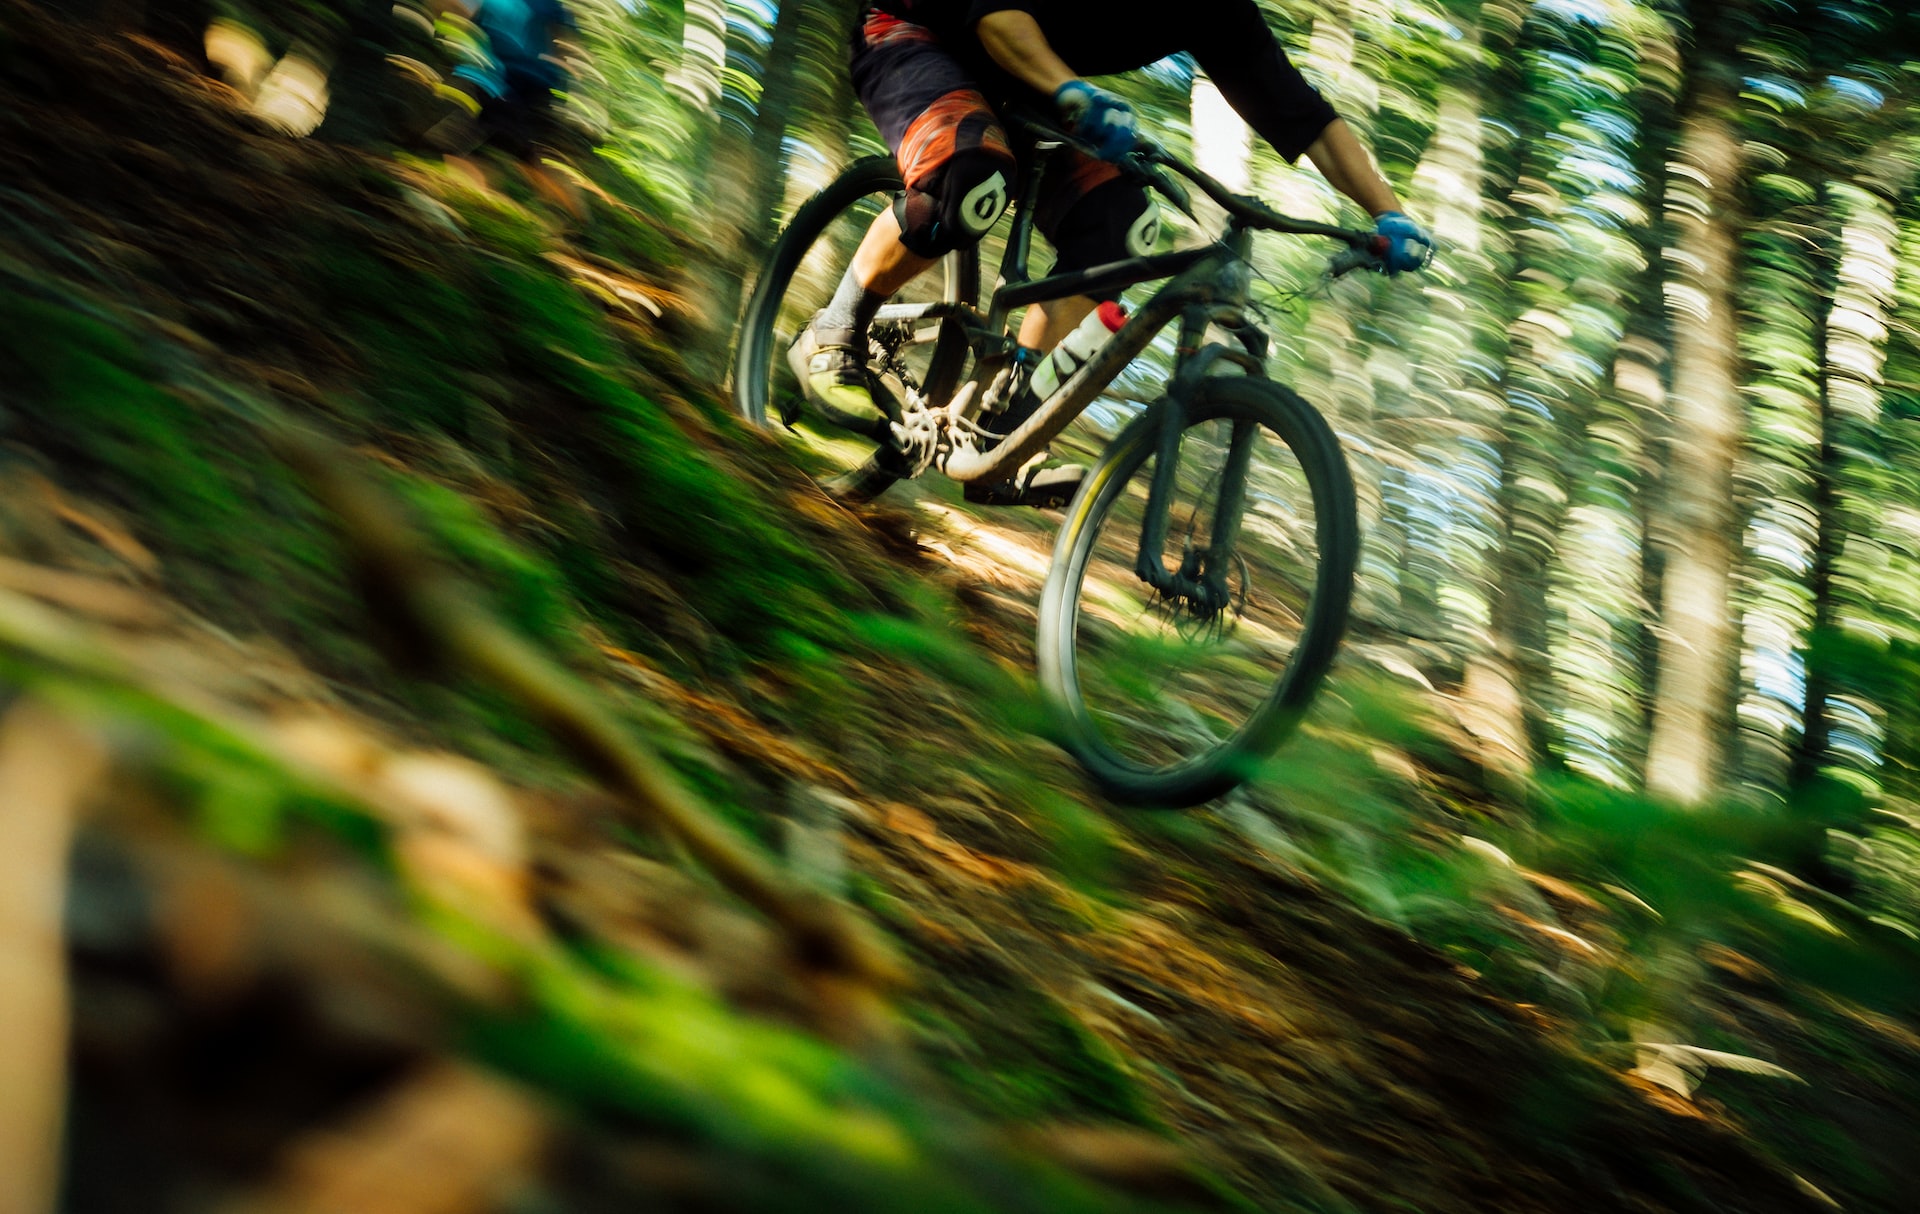 We tell you about the fastest kind of MTB!